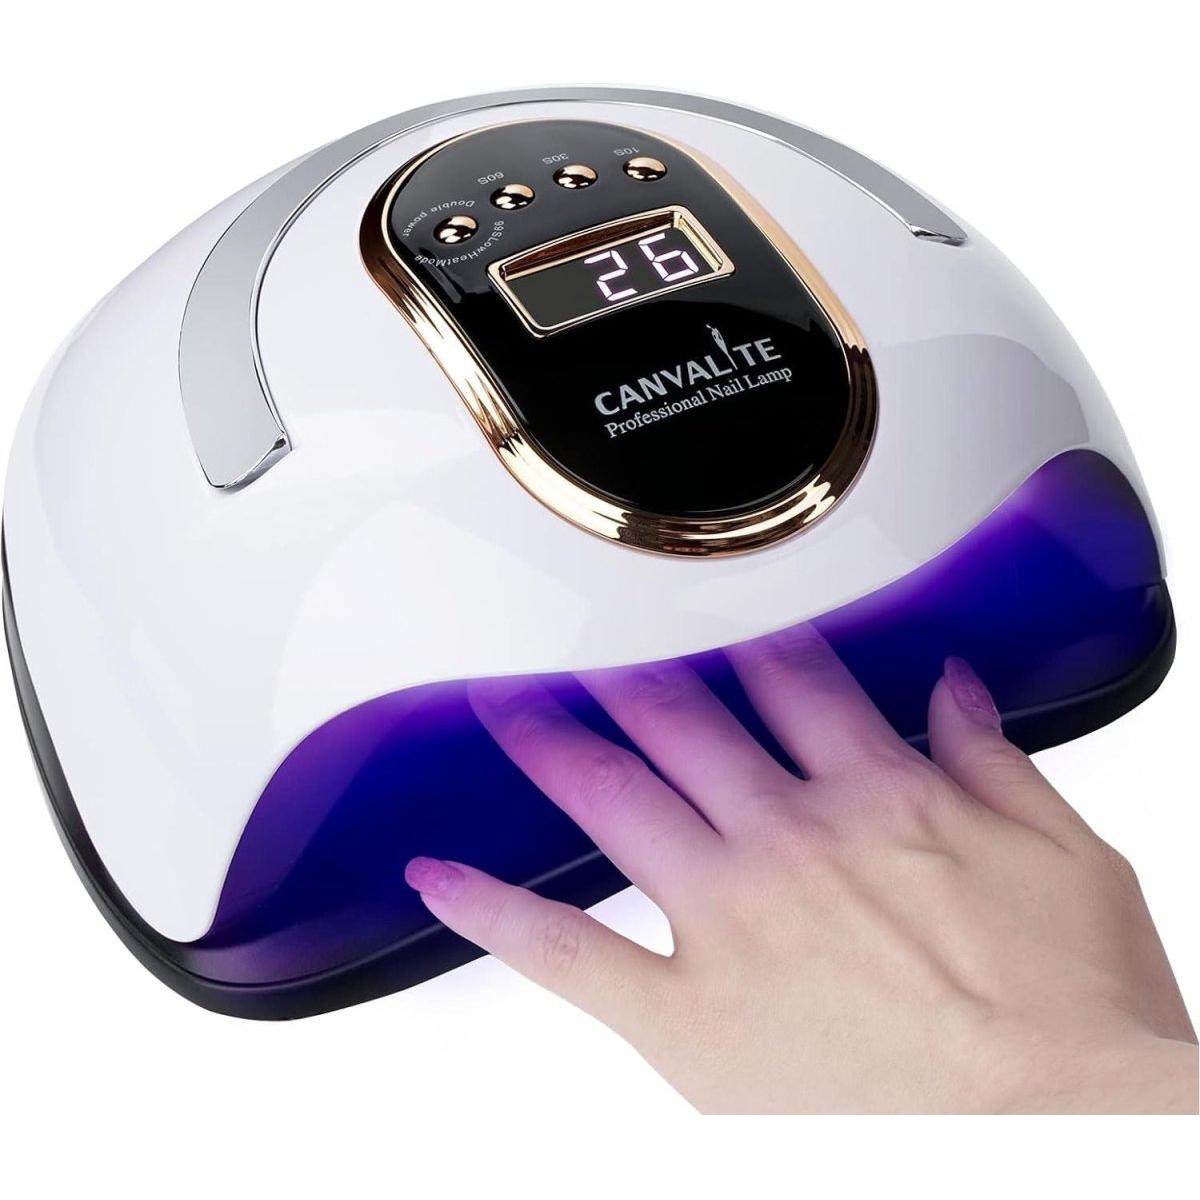 Canvalite Professional UV Nail Lamp 168W - DG International Ventures Limited